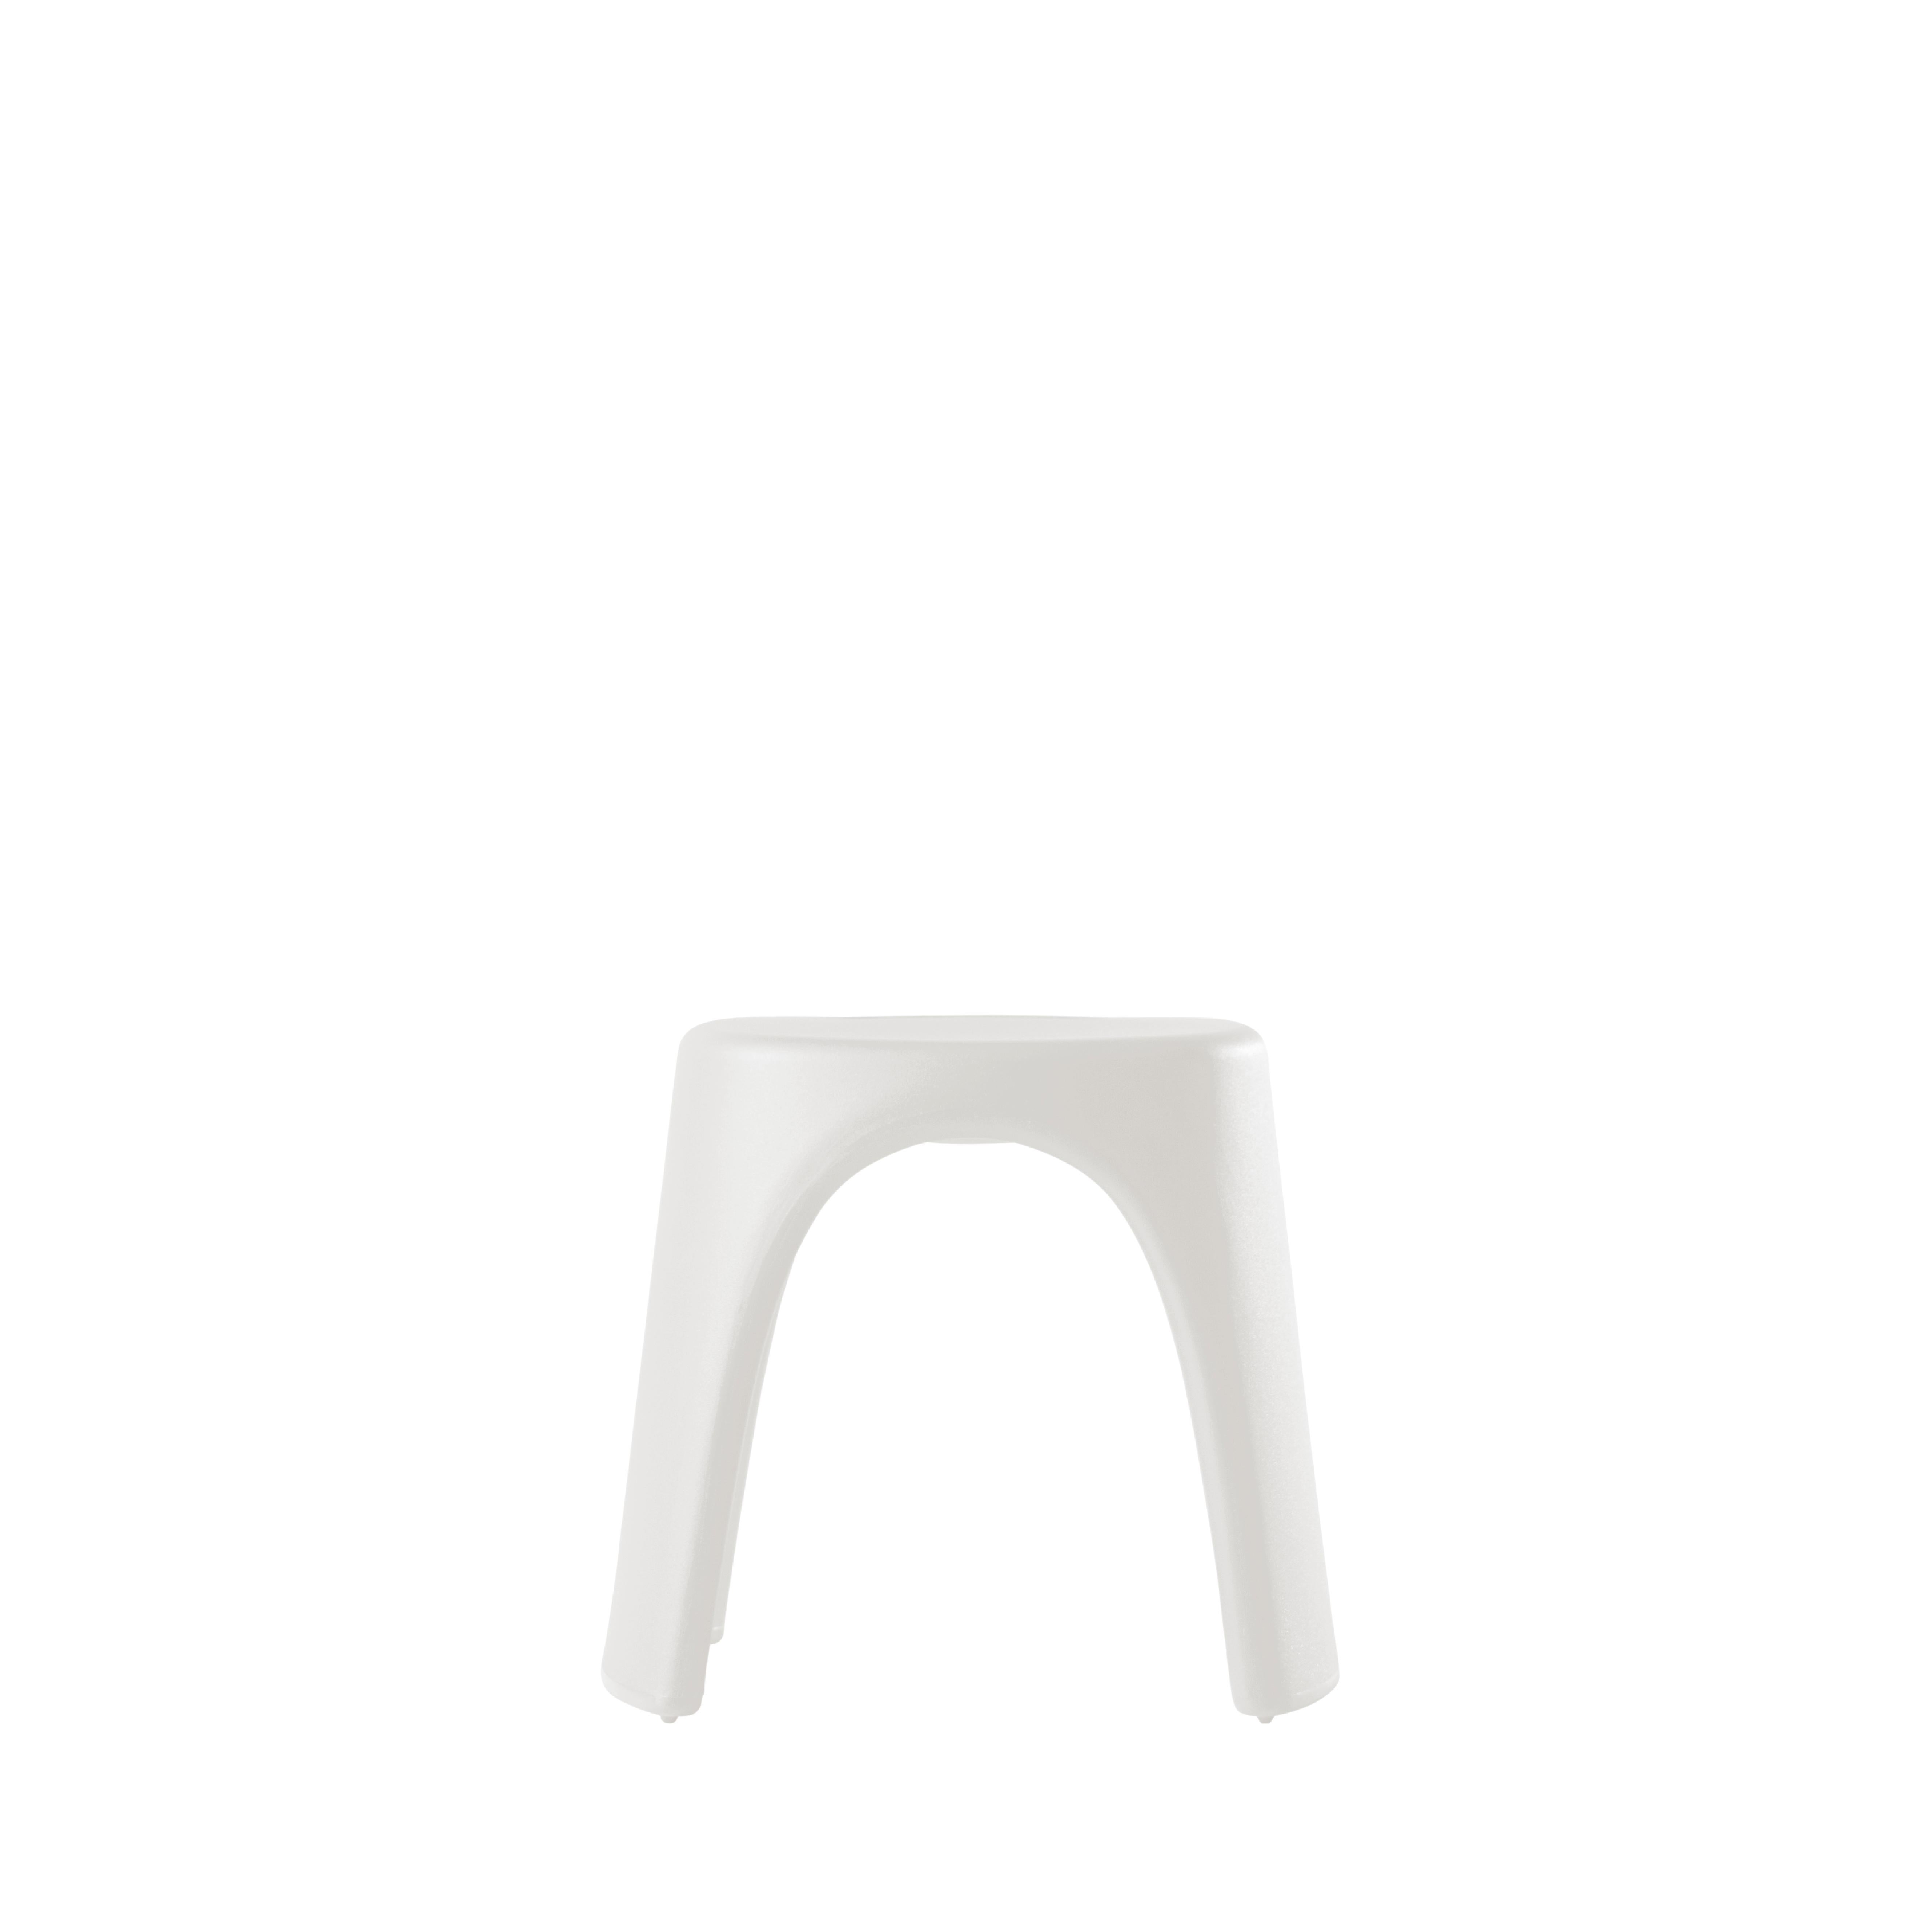 Lime Green Amélie Sgabello Stool by Italo Pertichini
Dimensions: D 40 x W 46 x H 43 cm.
Materials: Polyethylene.
Weight: 4 kg.

Available in a standard version and lacquered version. Prices may vary. Available in different color options. This